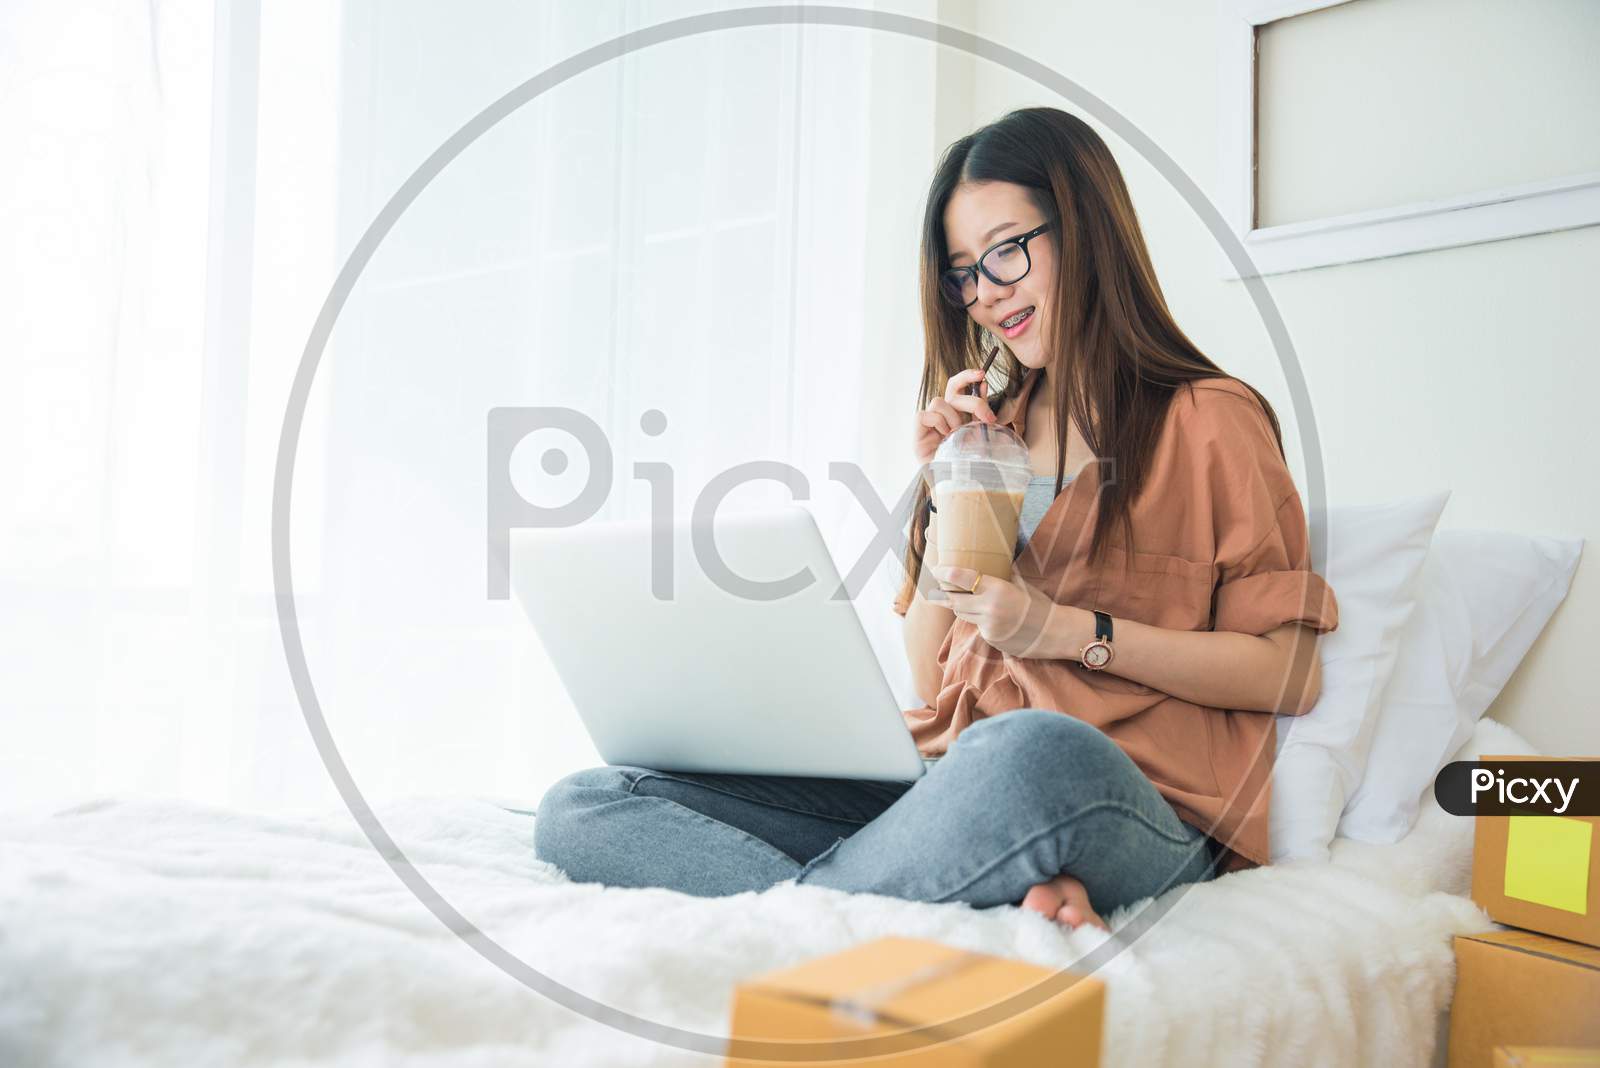 Beauty Asian Woman Using Laptop And Drinking Coffee On Bed. Business And Technology Concept. Delivery And Online Shopping Concept. Post And Service Theme.